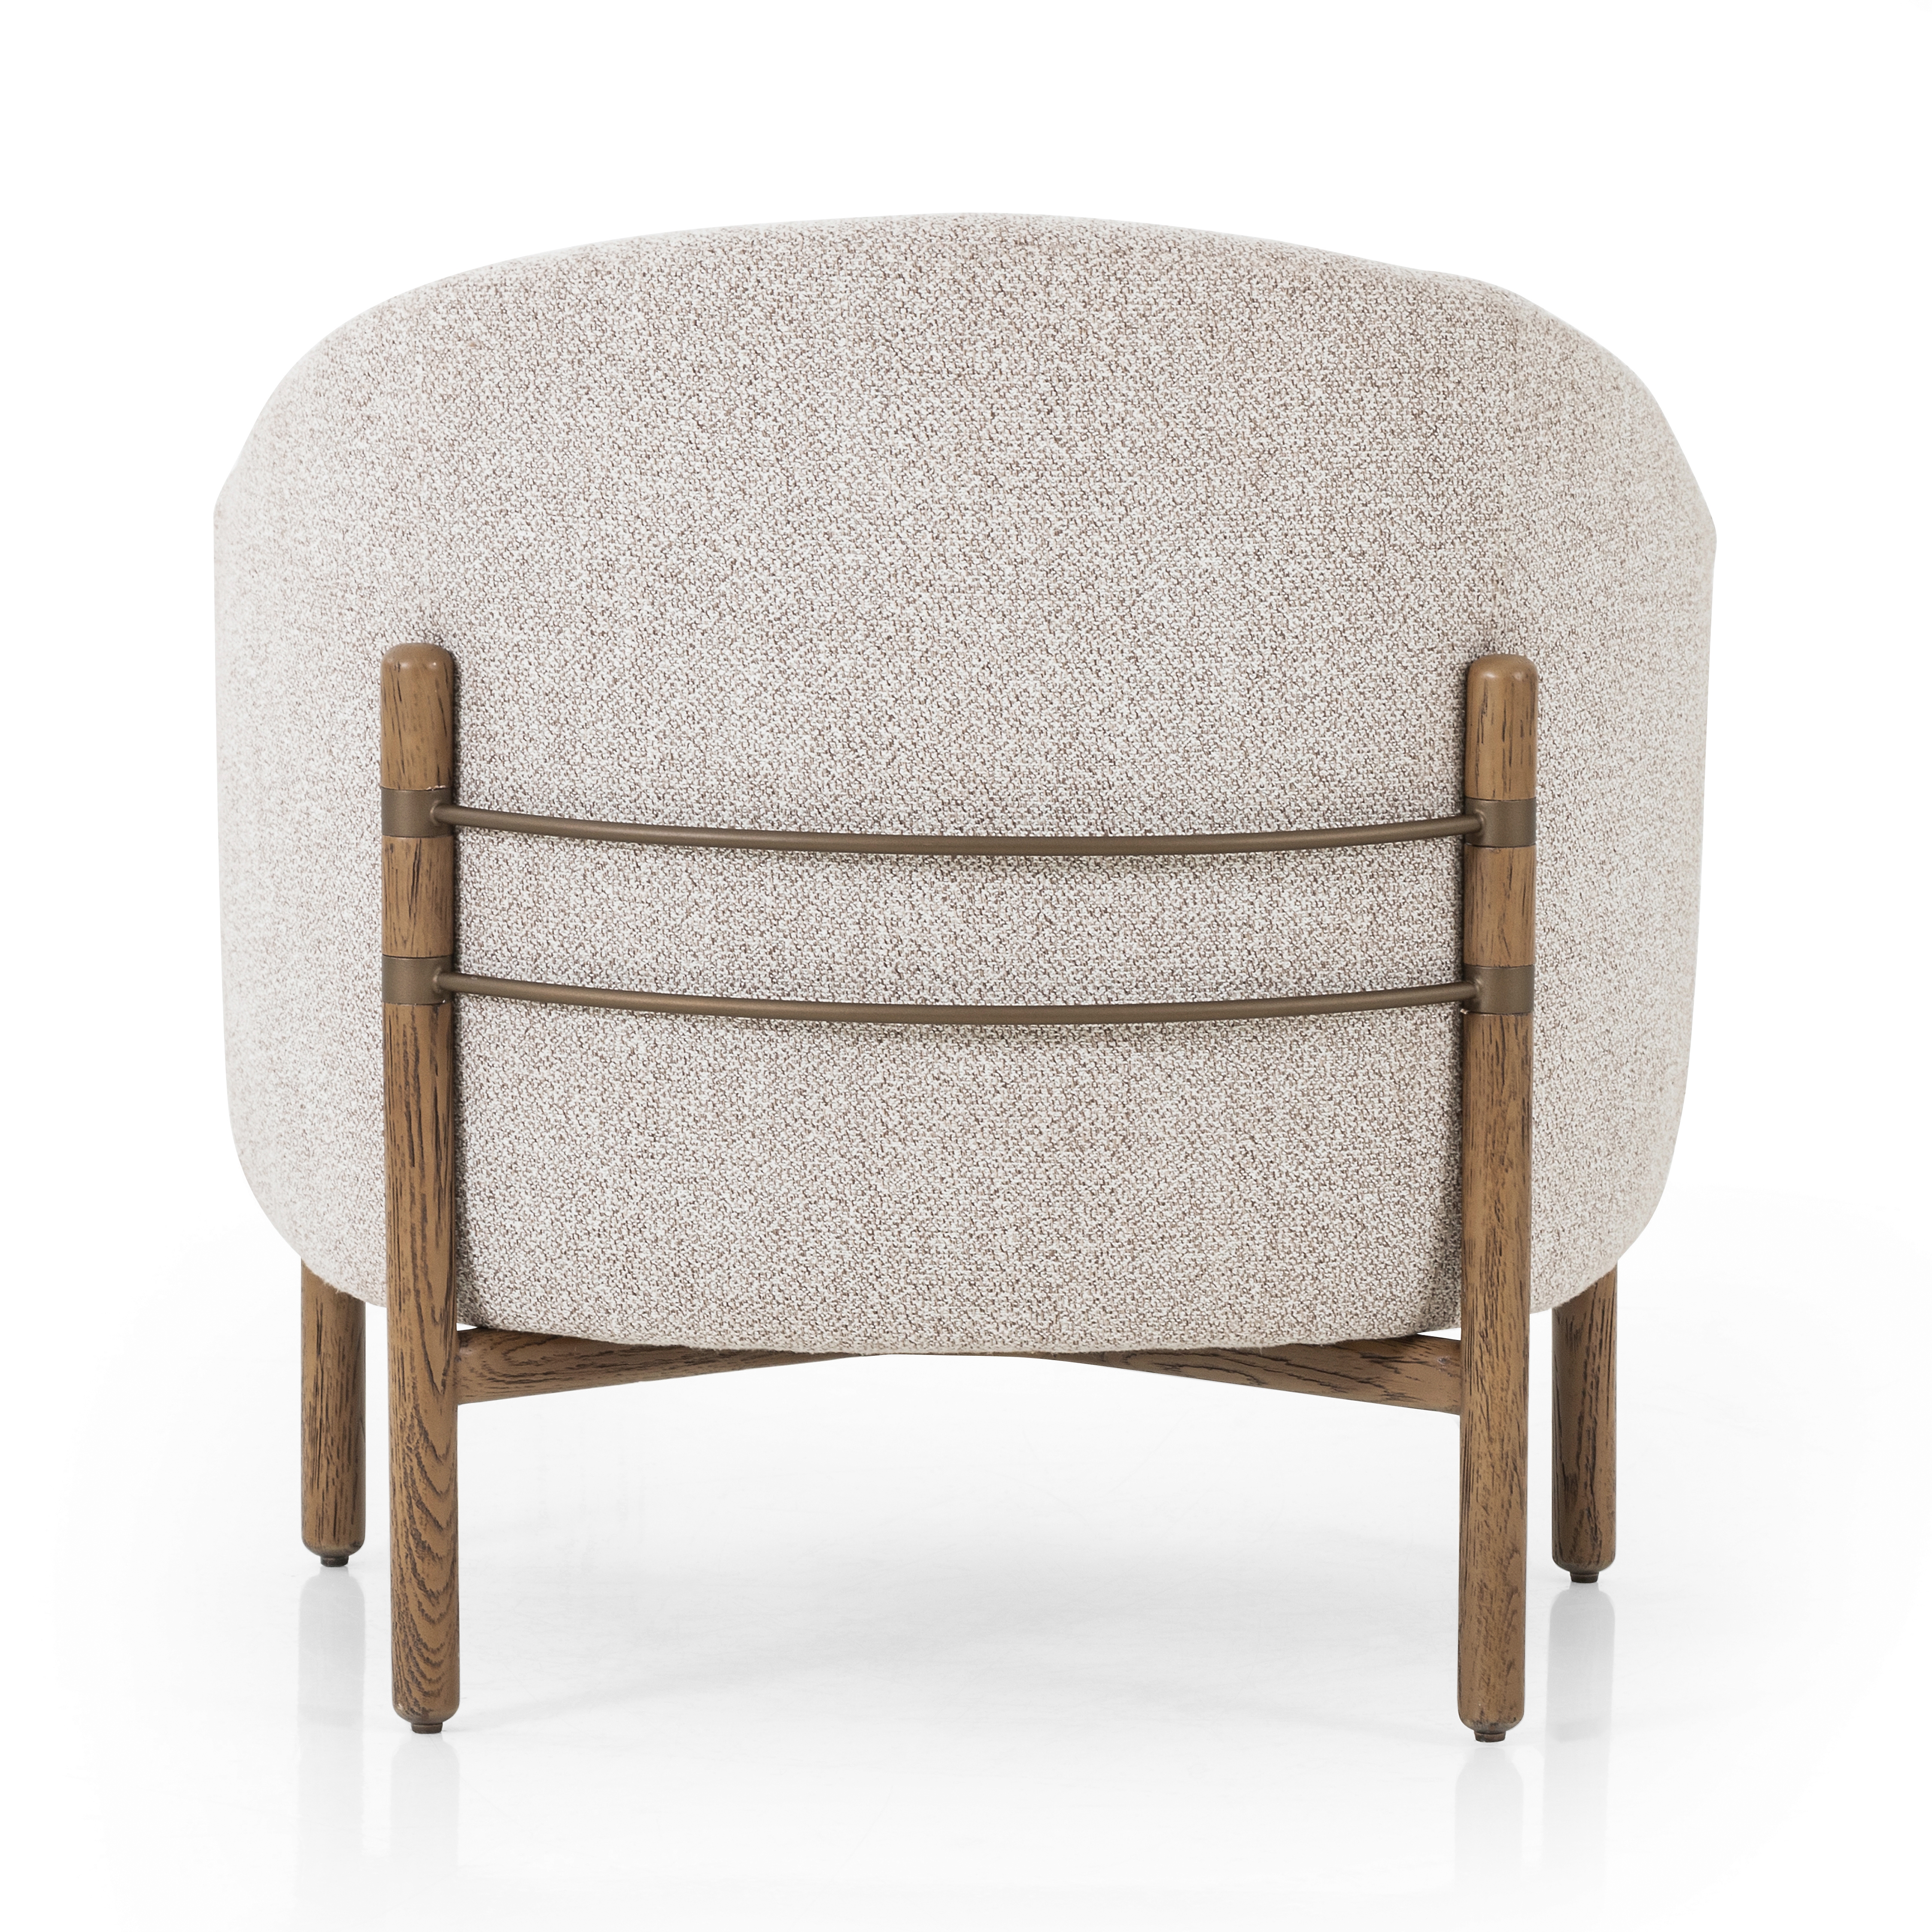 Enfield Chair-Astor Stone - Image 6